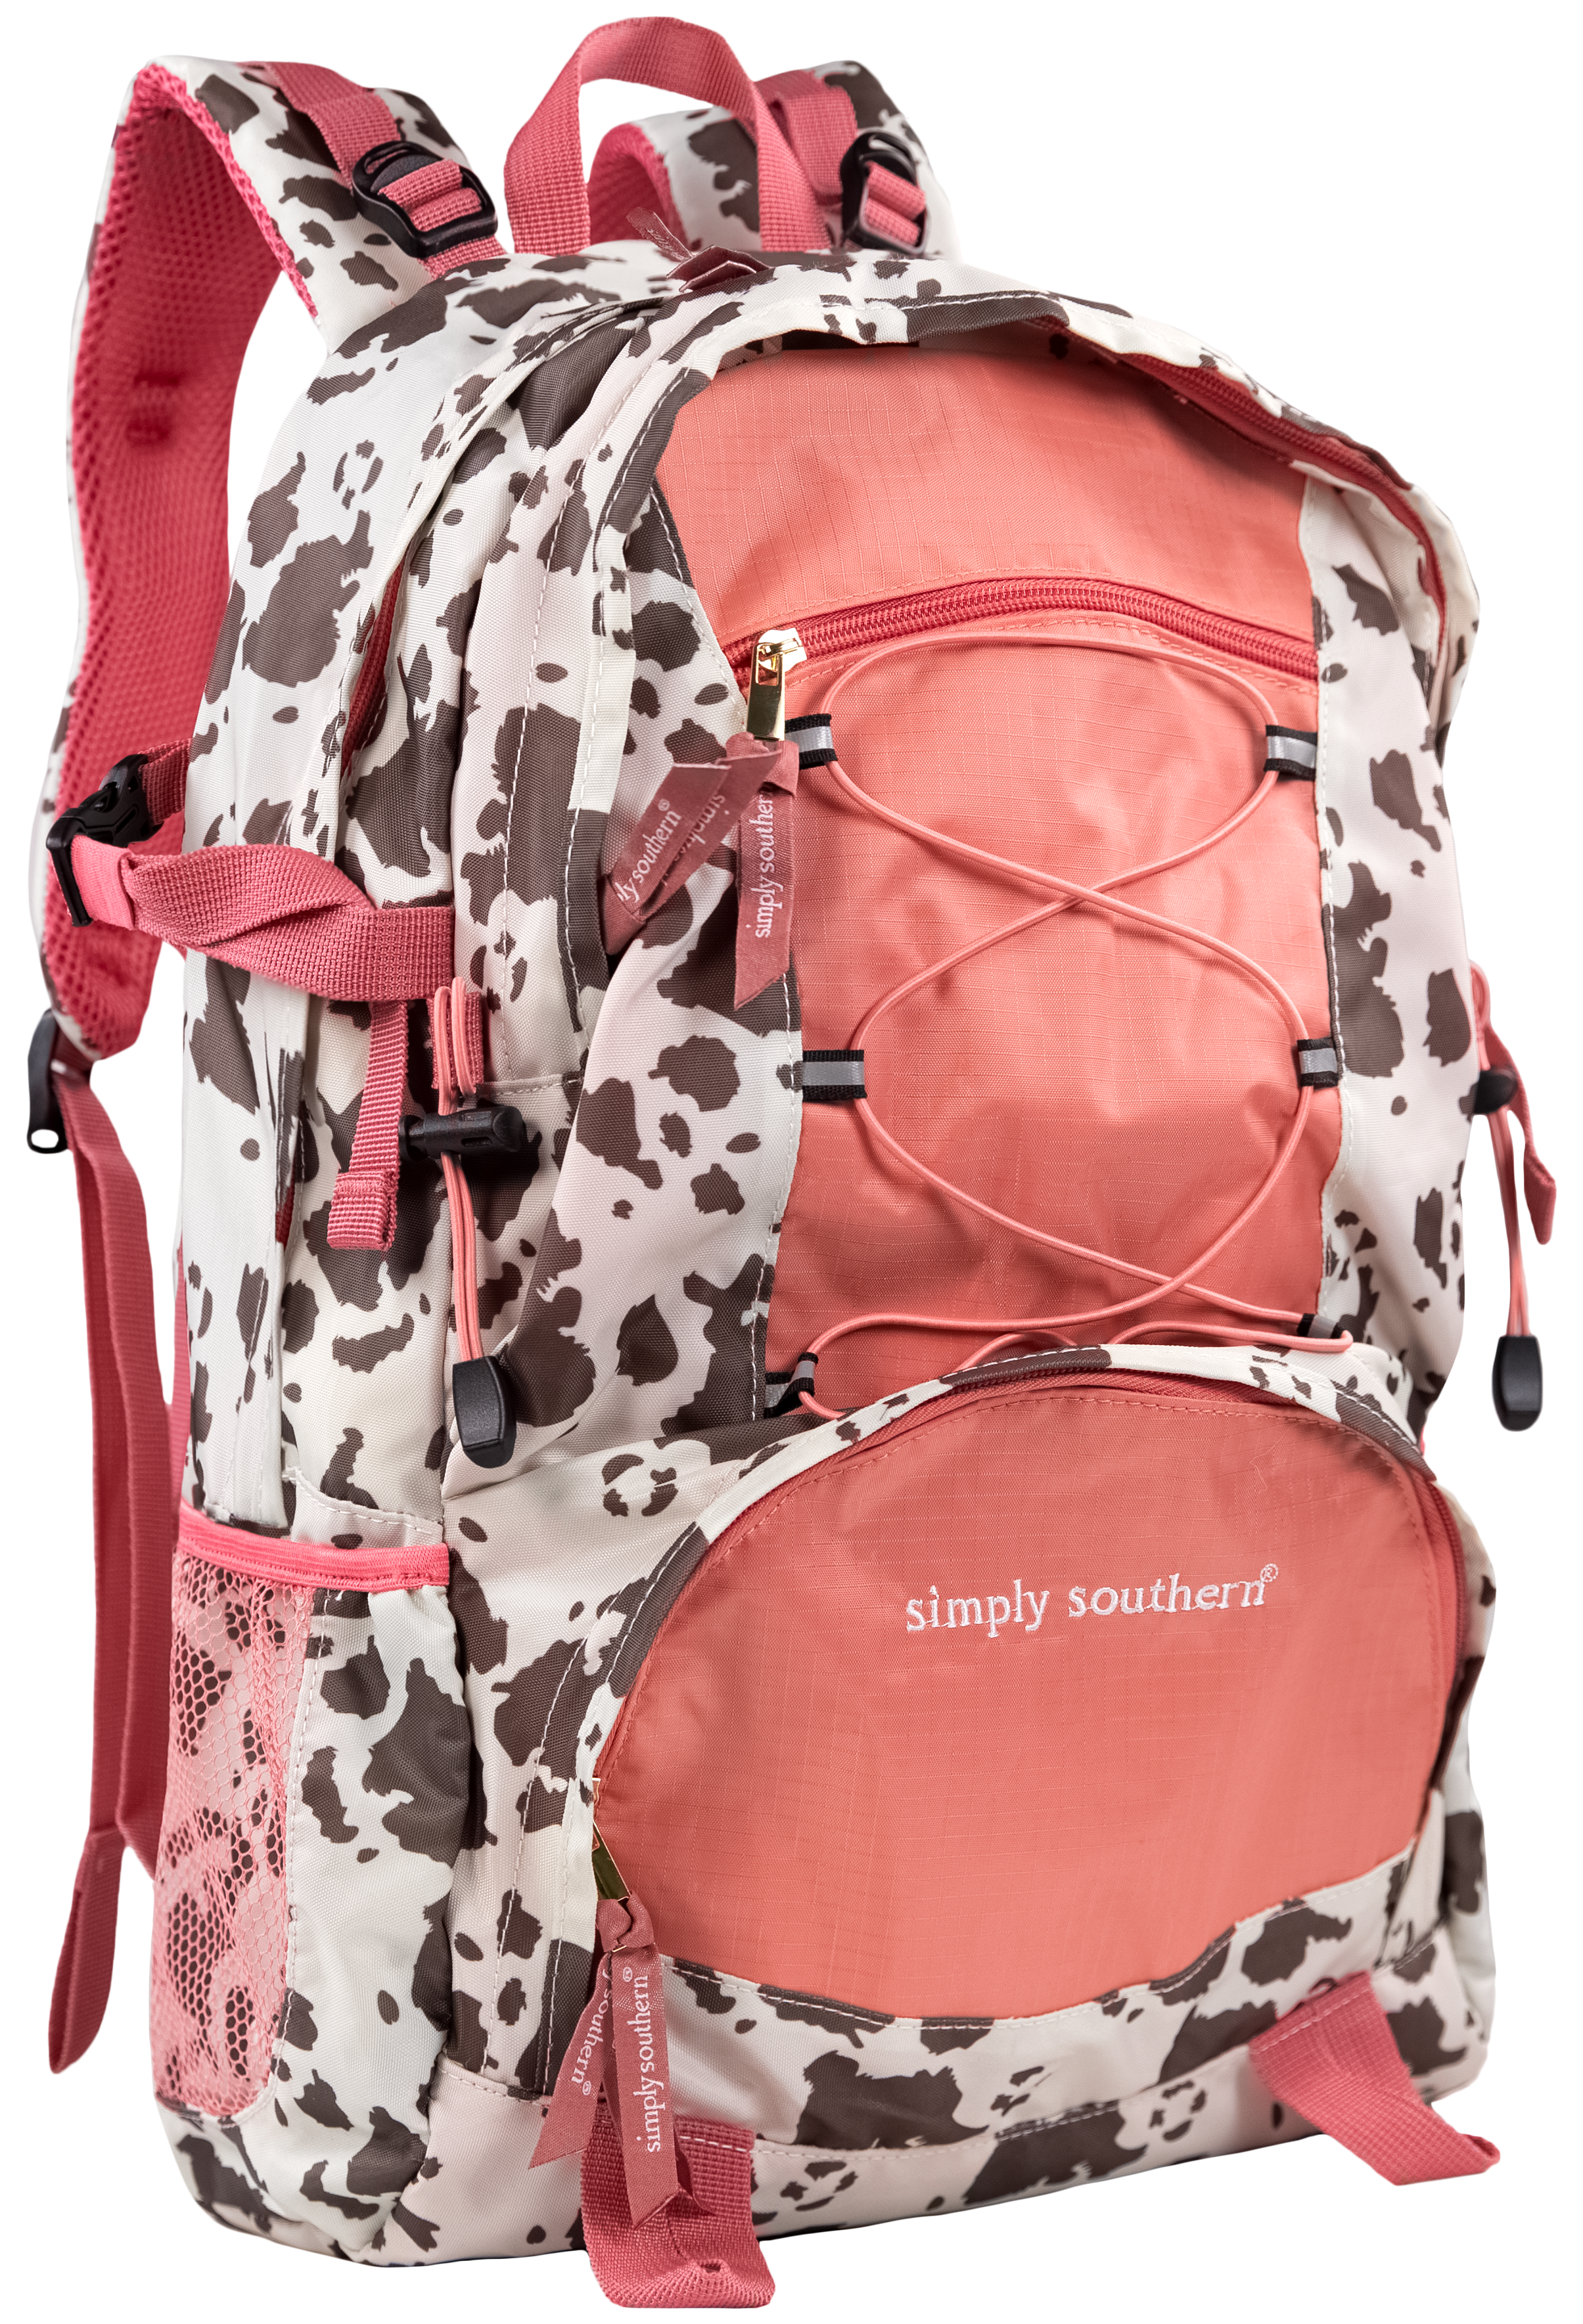 Simply Southern Backpack